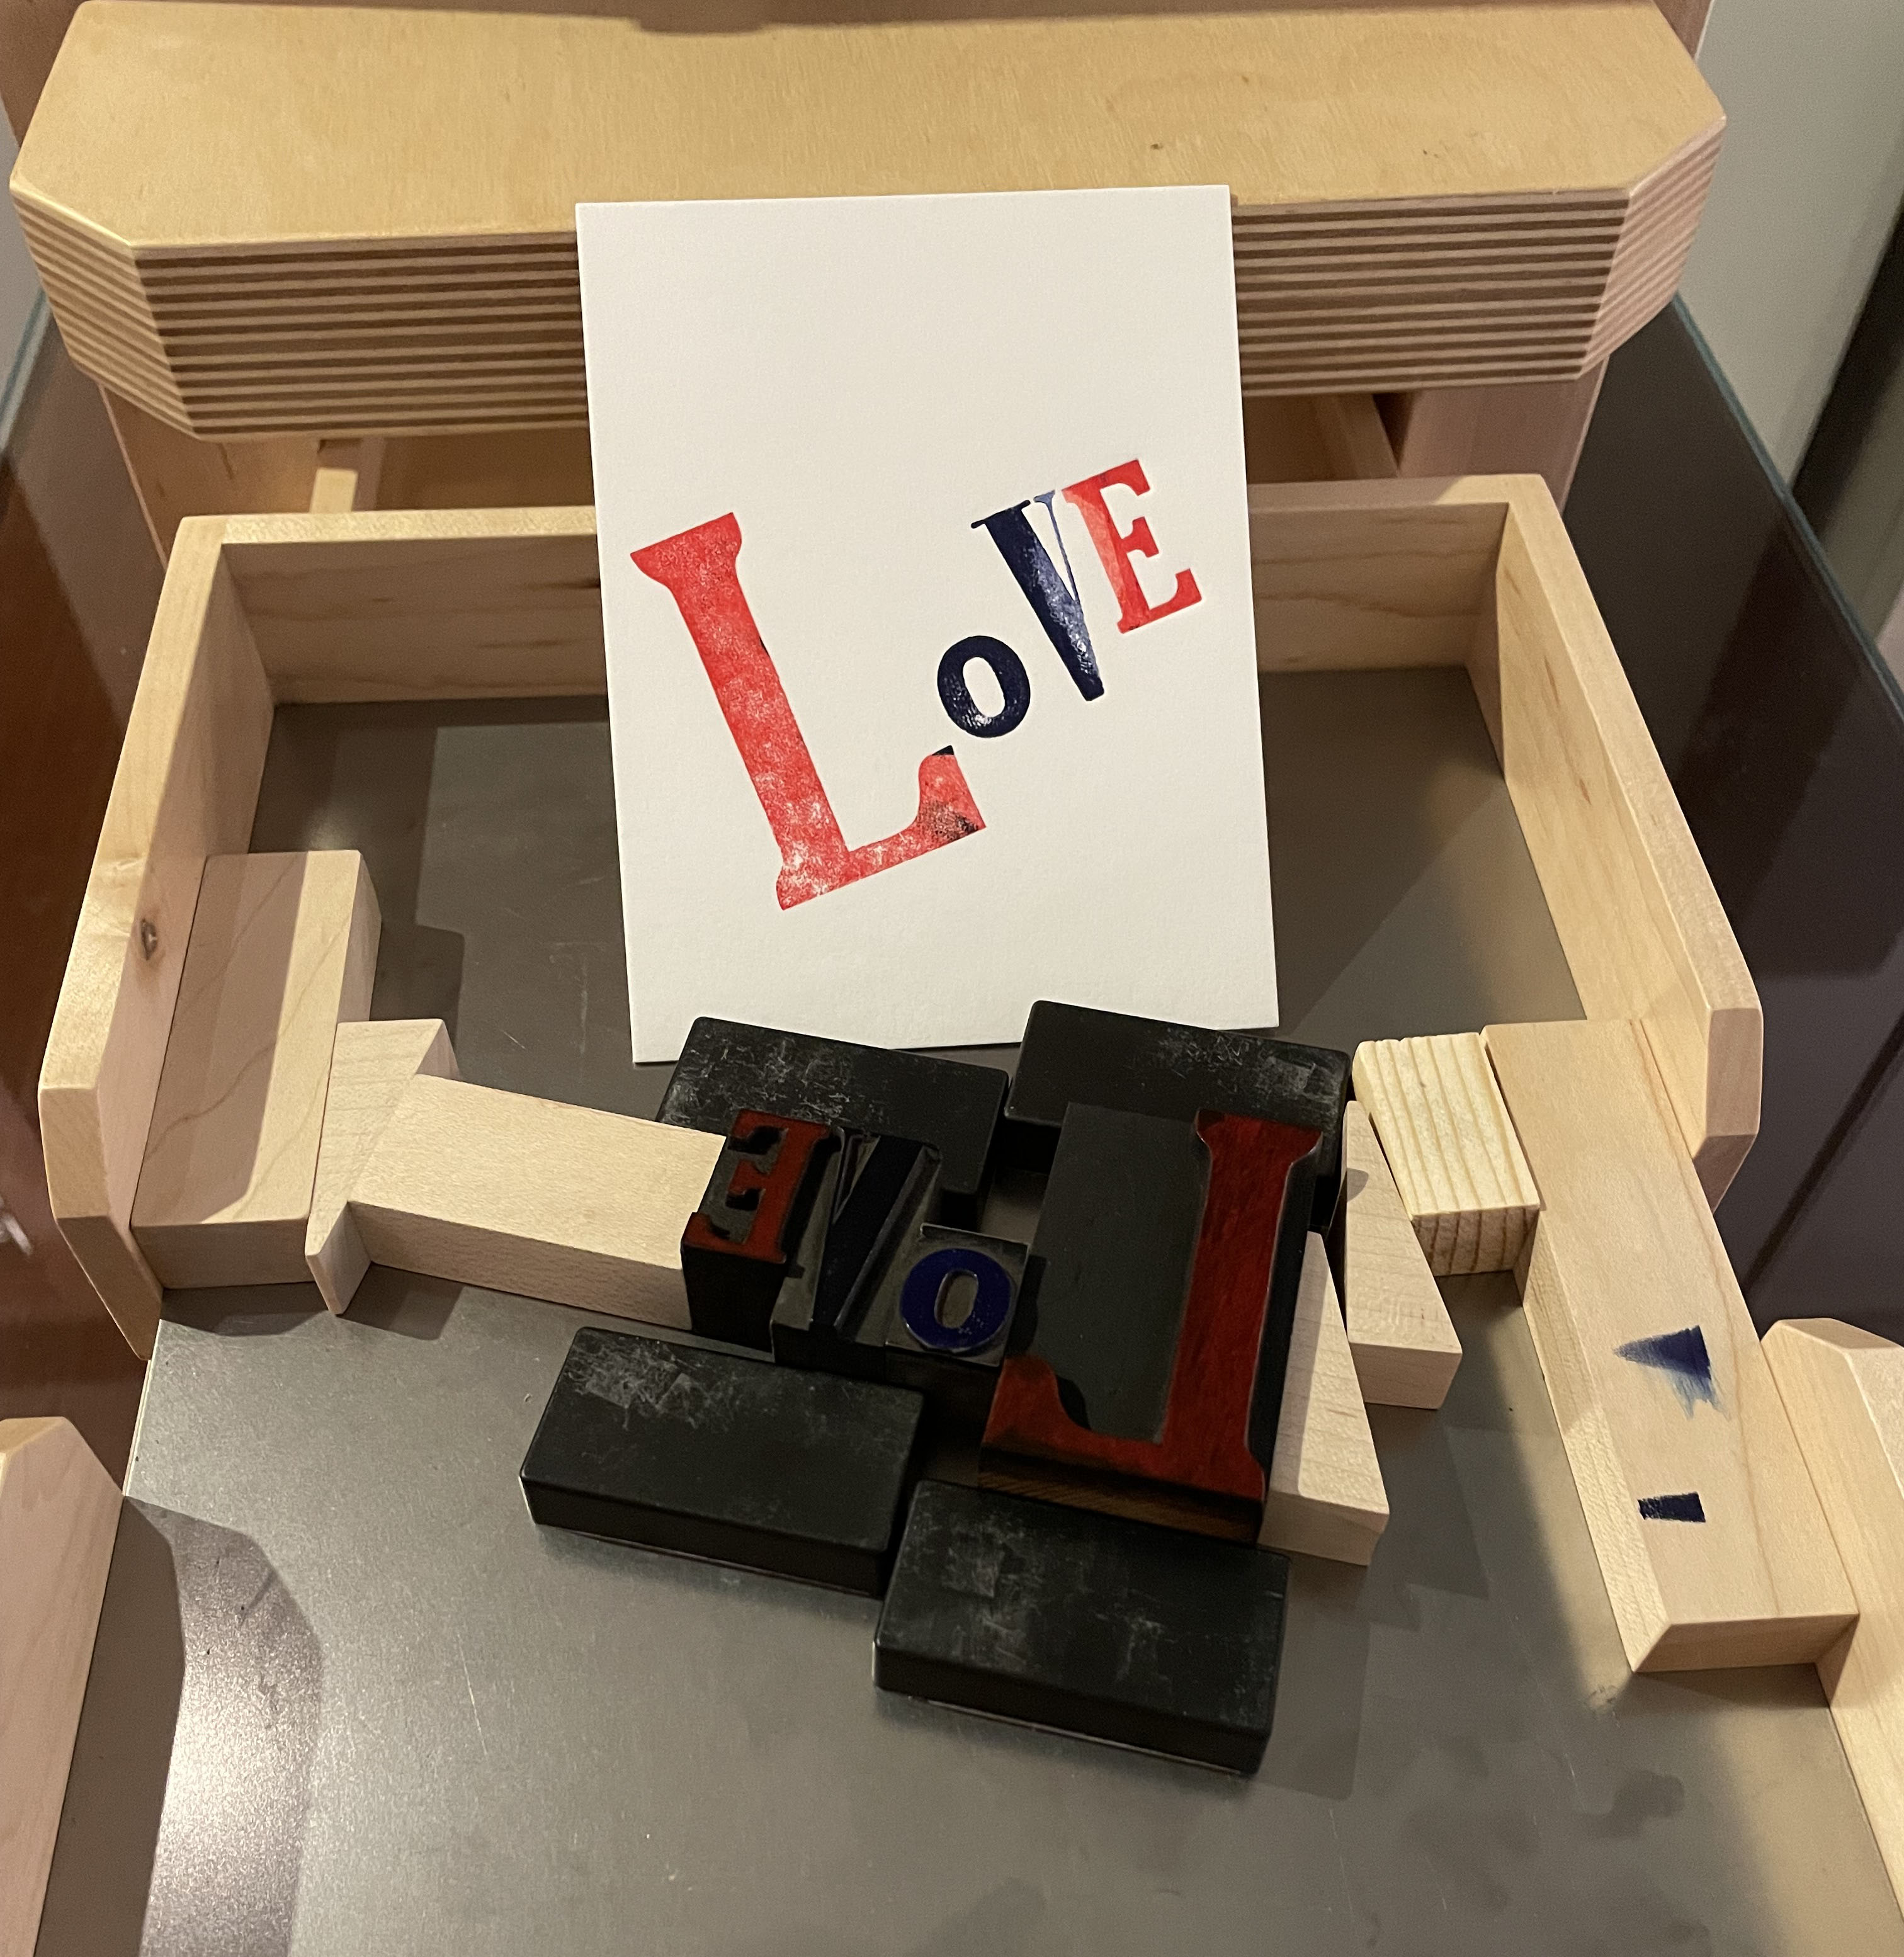 image of Book beetle tabletop press with inked wood type locked up with magnets and wood furniture spelling L-O-V-E. White notecard with print of L-O-V-E in red and blue ink